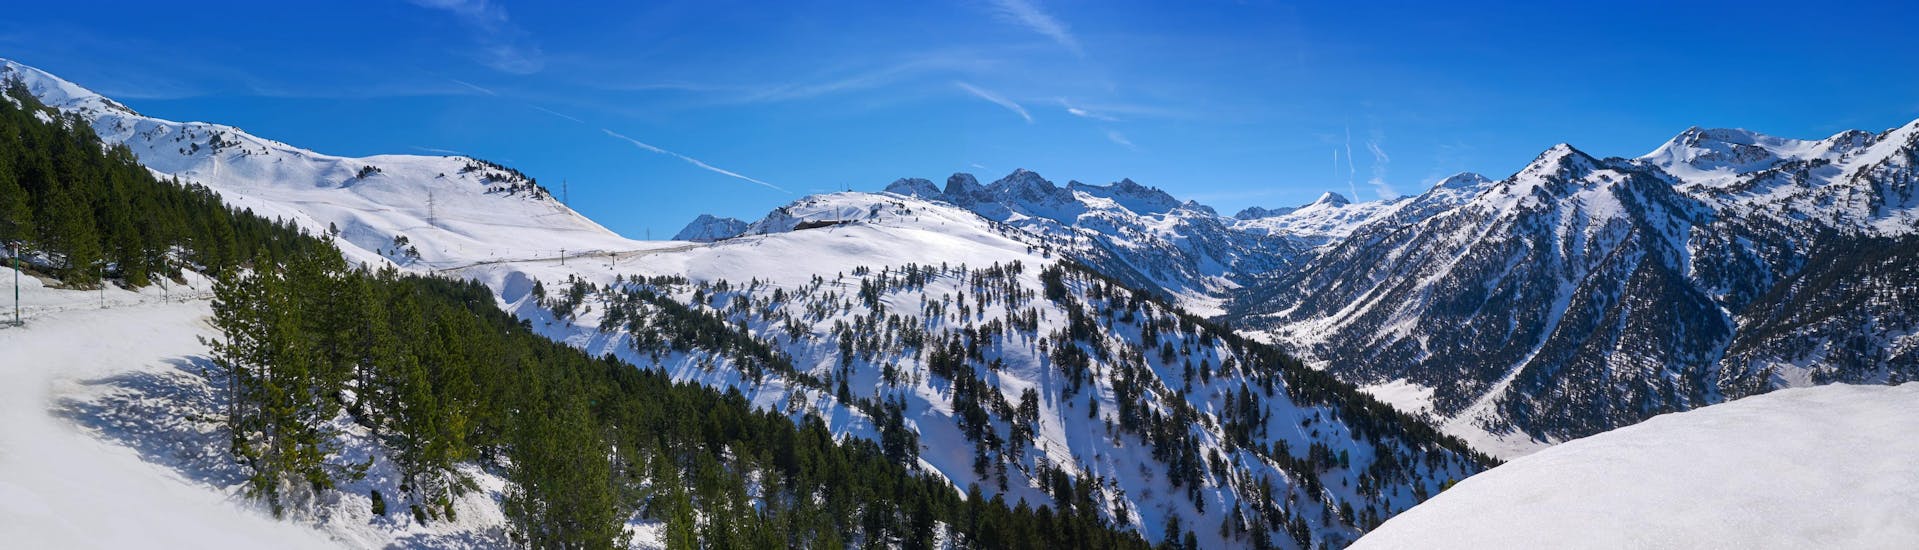 View of the pine-covered mountains in Catalonia where ski schools offer ski lessons. 